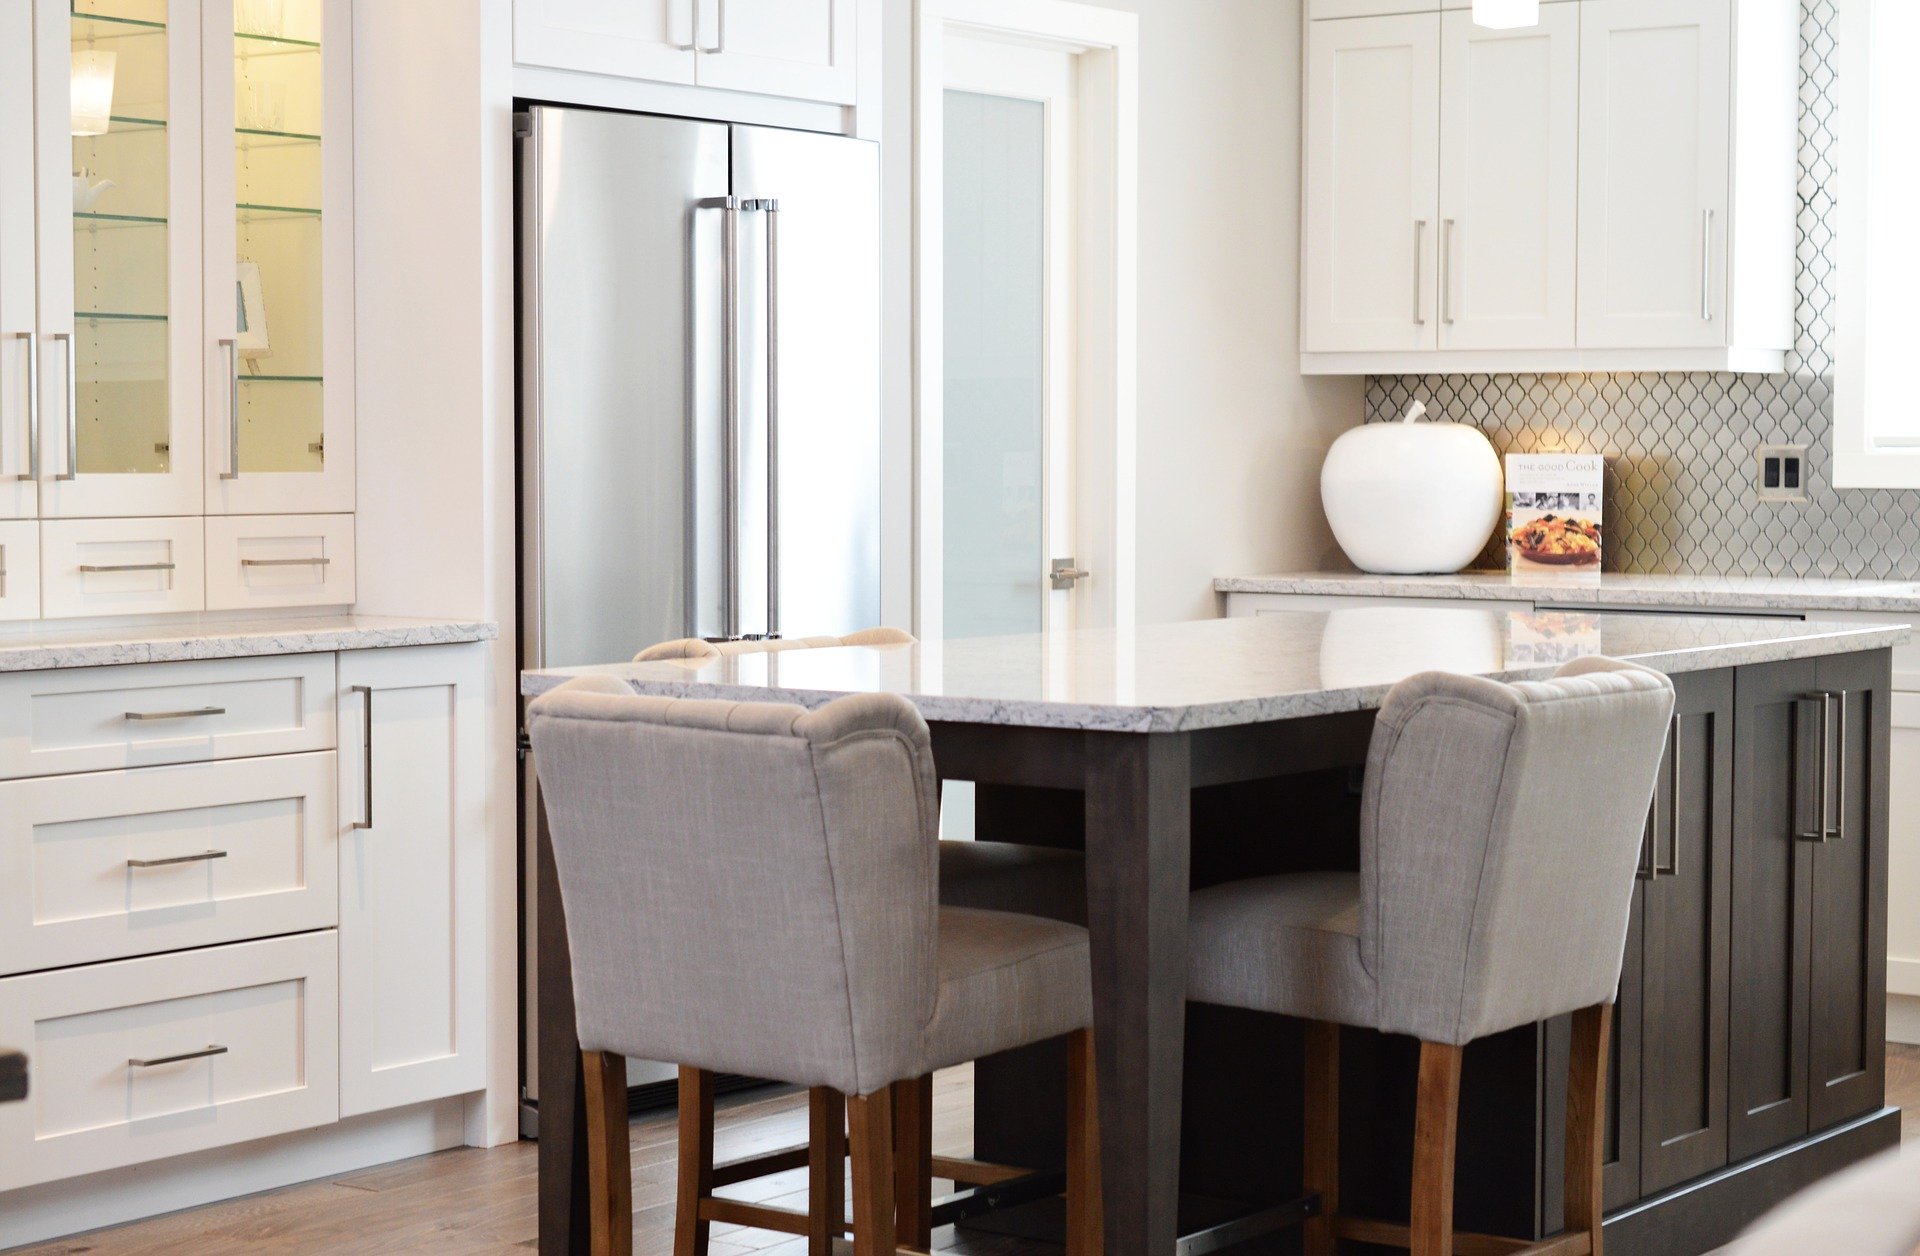 Why Refinish Rather Than Demolish Your Kitchen Cabinets?